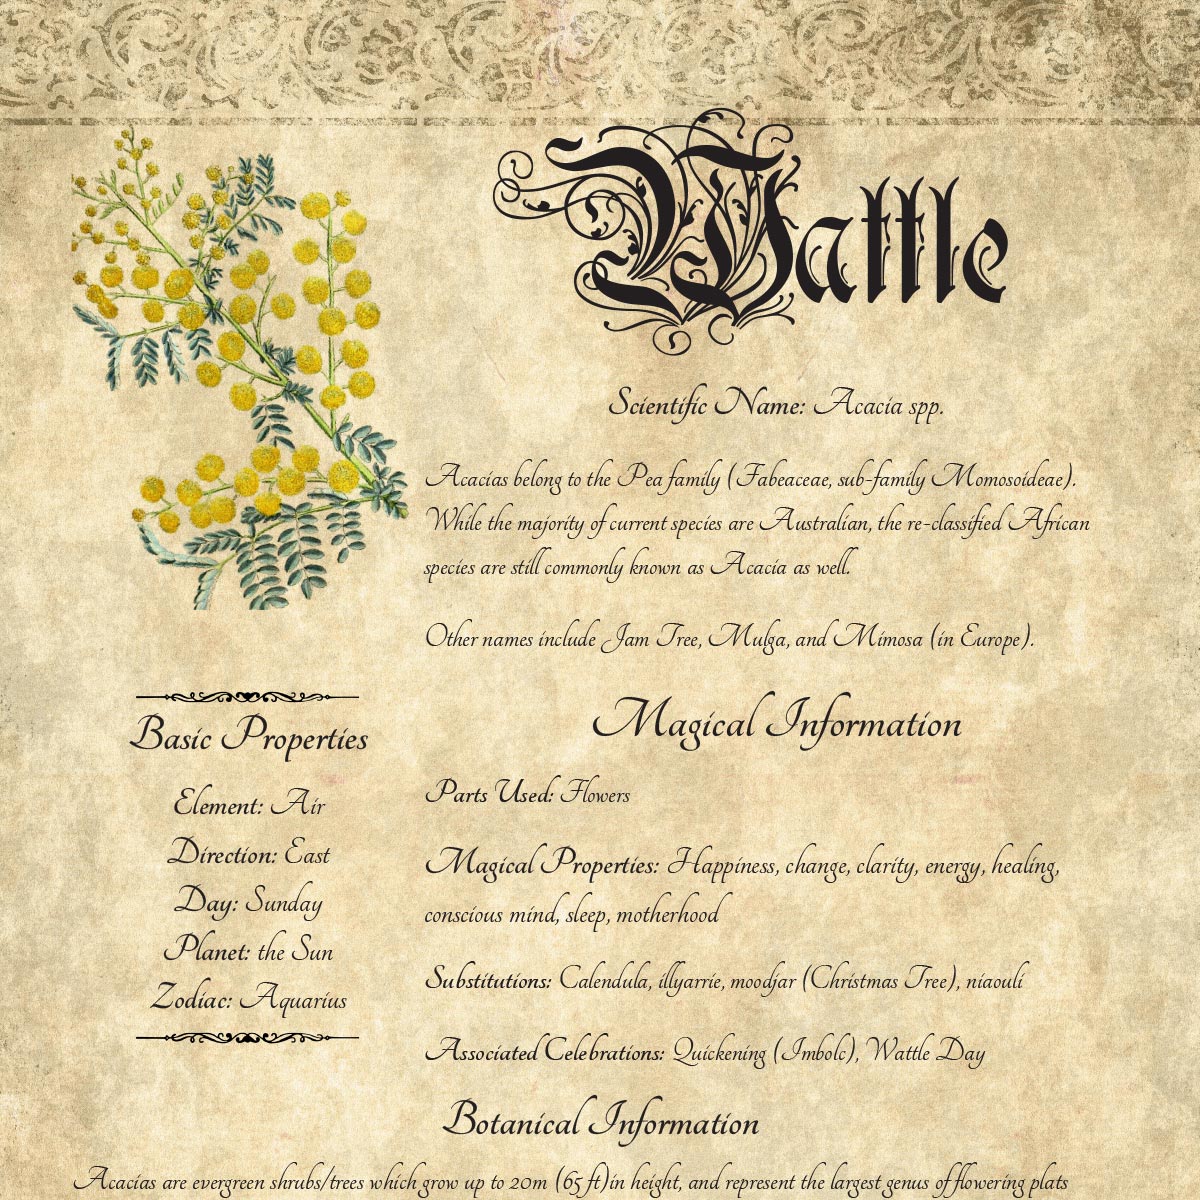 Antique-style grimoire page on the properties of Wattle, with an aged paper background and script font